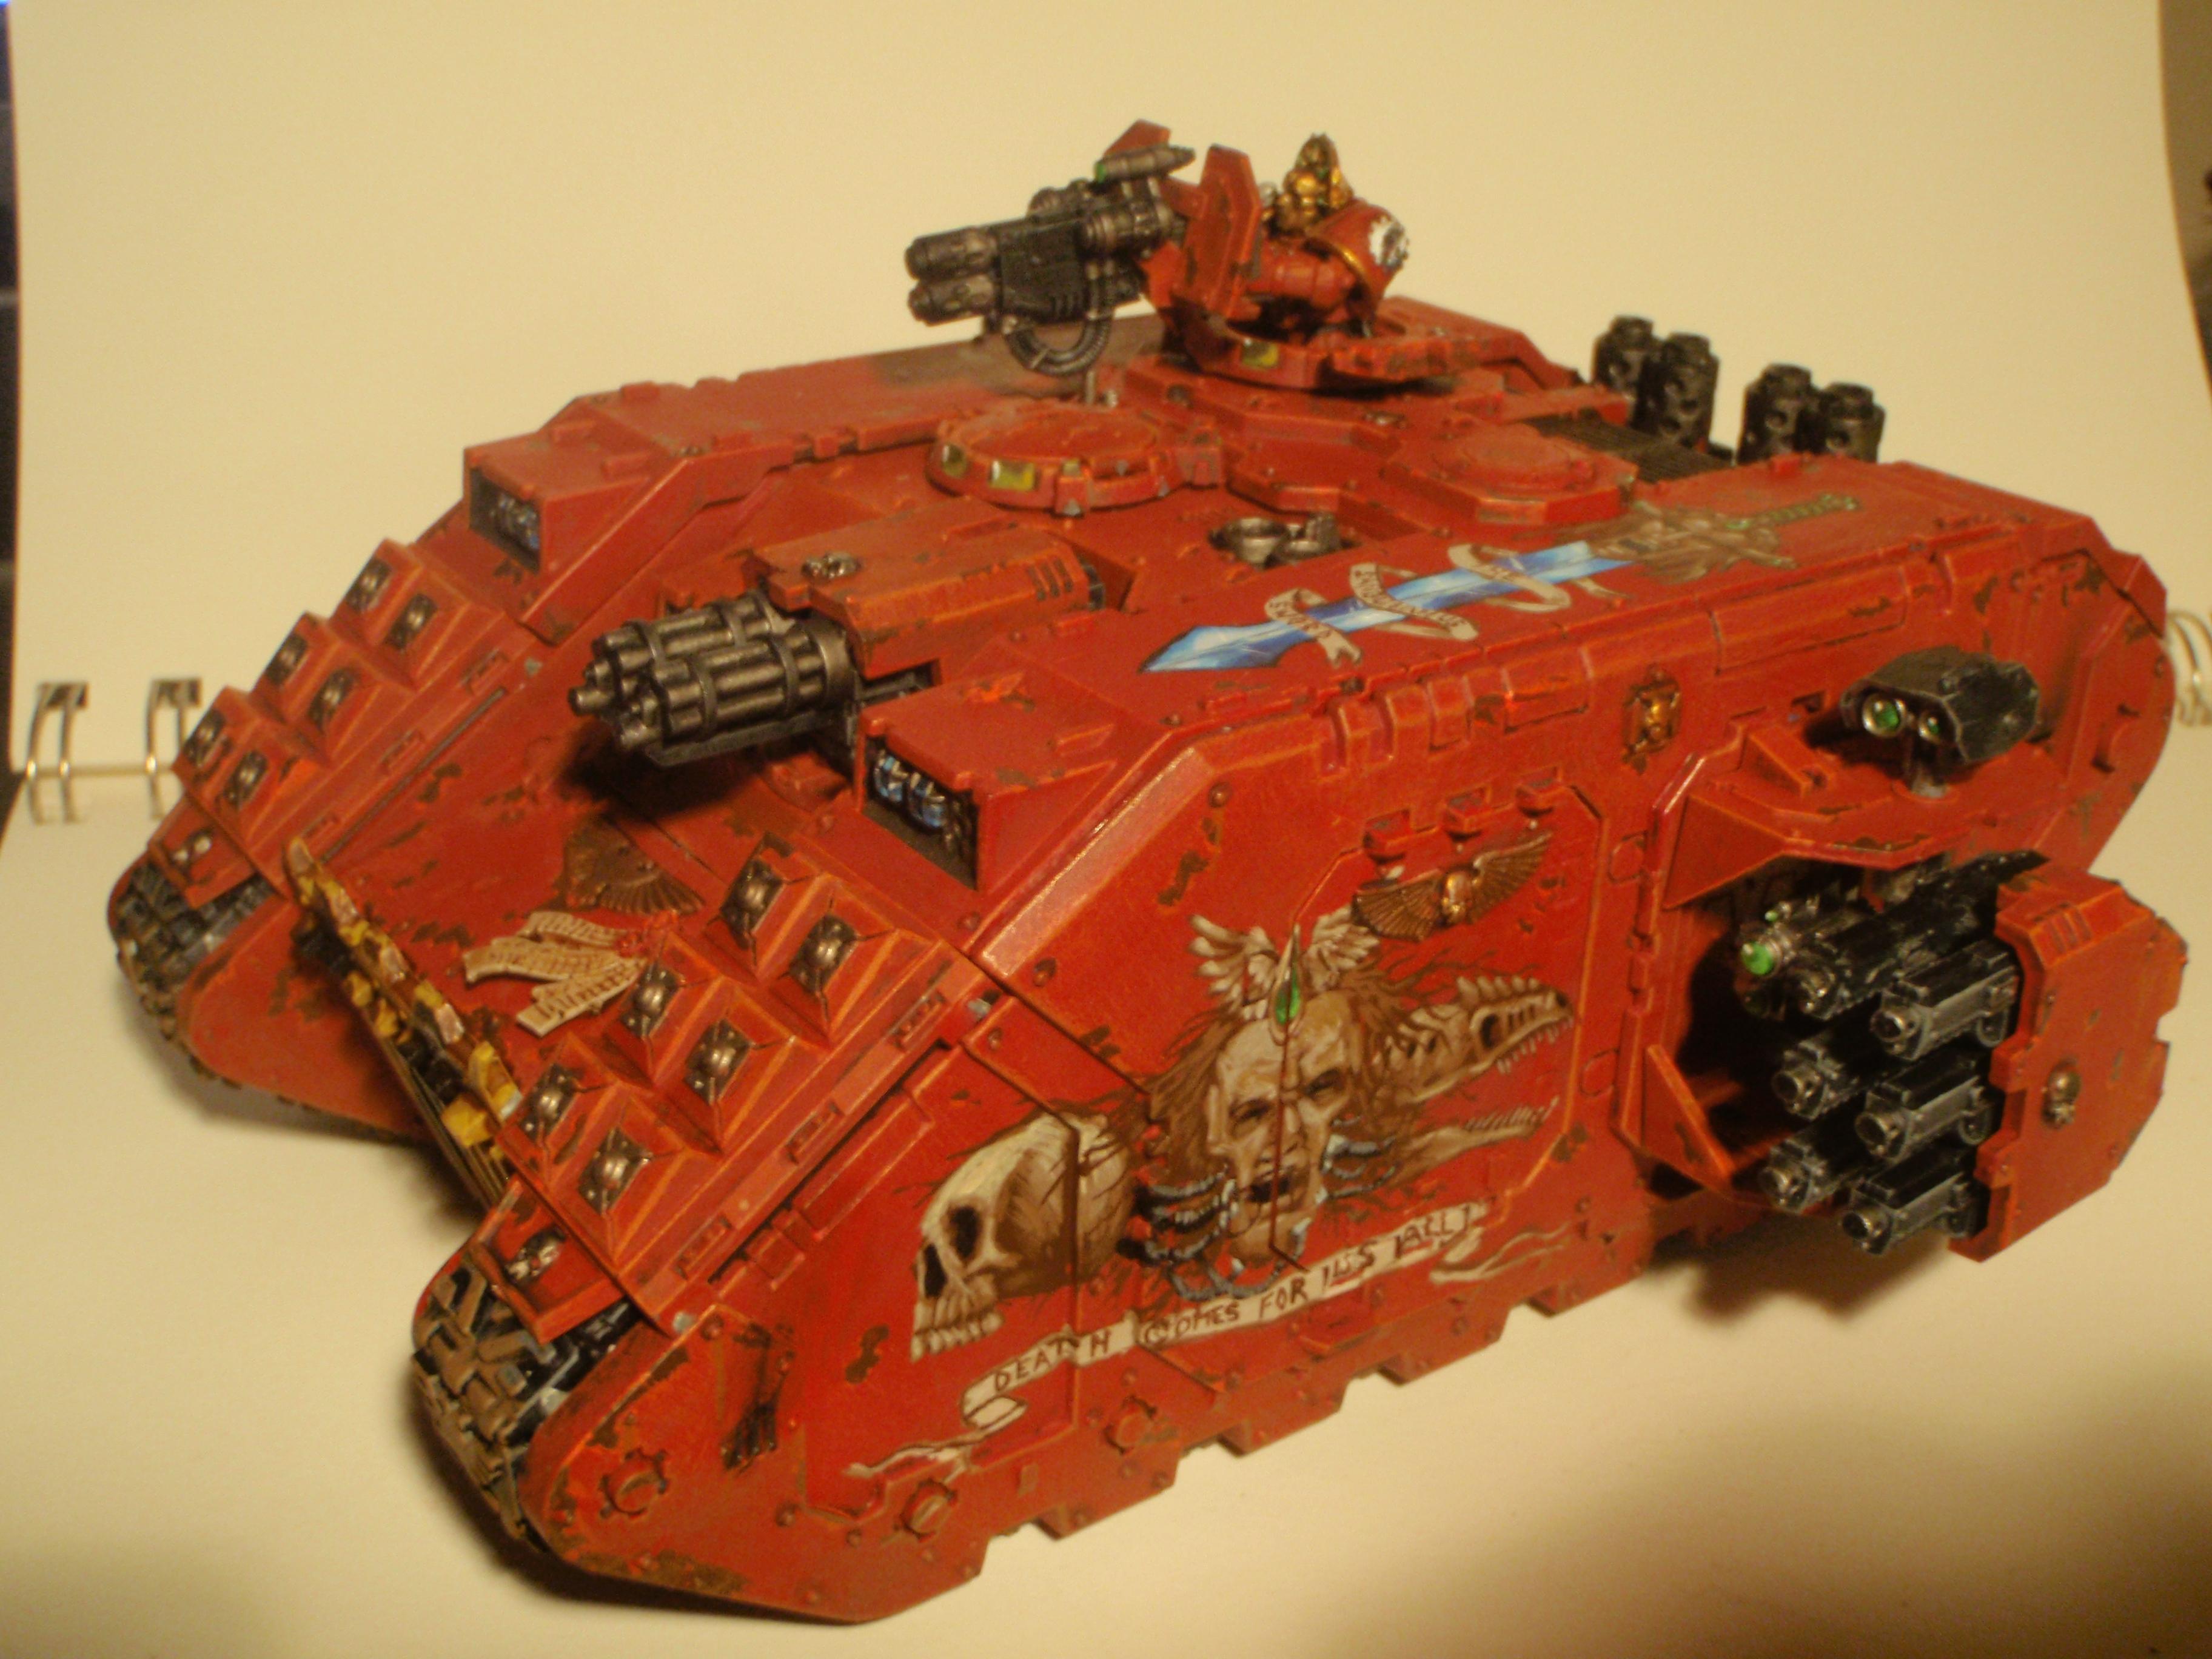 Angel, Artwork, Blood, Blood Angels, Crusader, Death, Dreadnought, Freehand, Imperial, Land Raider, Red, Sanguinious, Space Marines, Tank